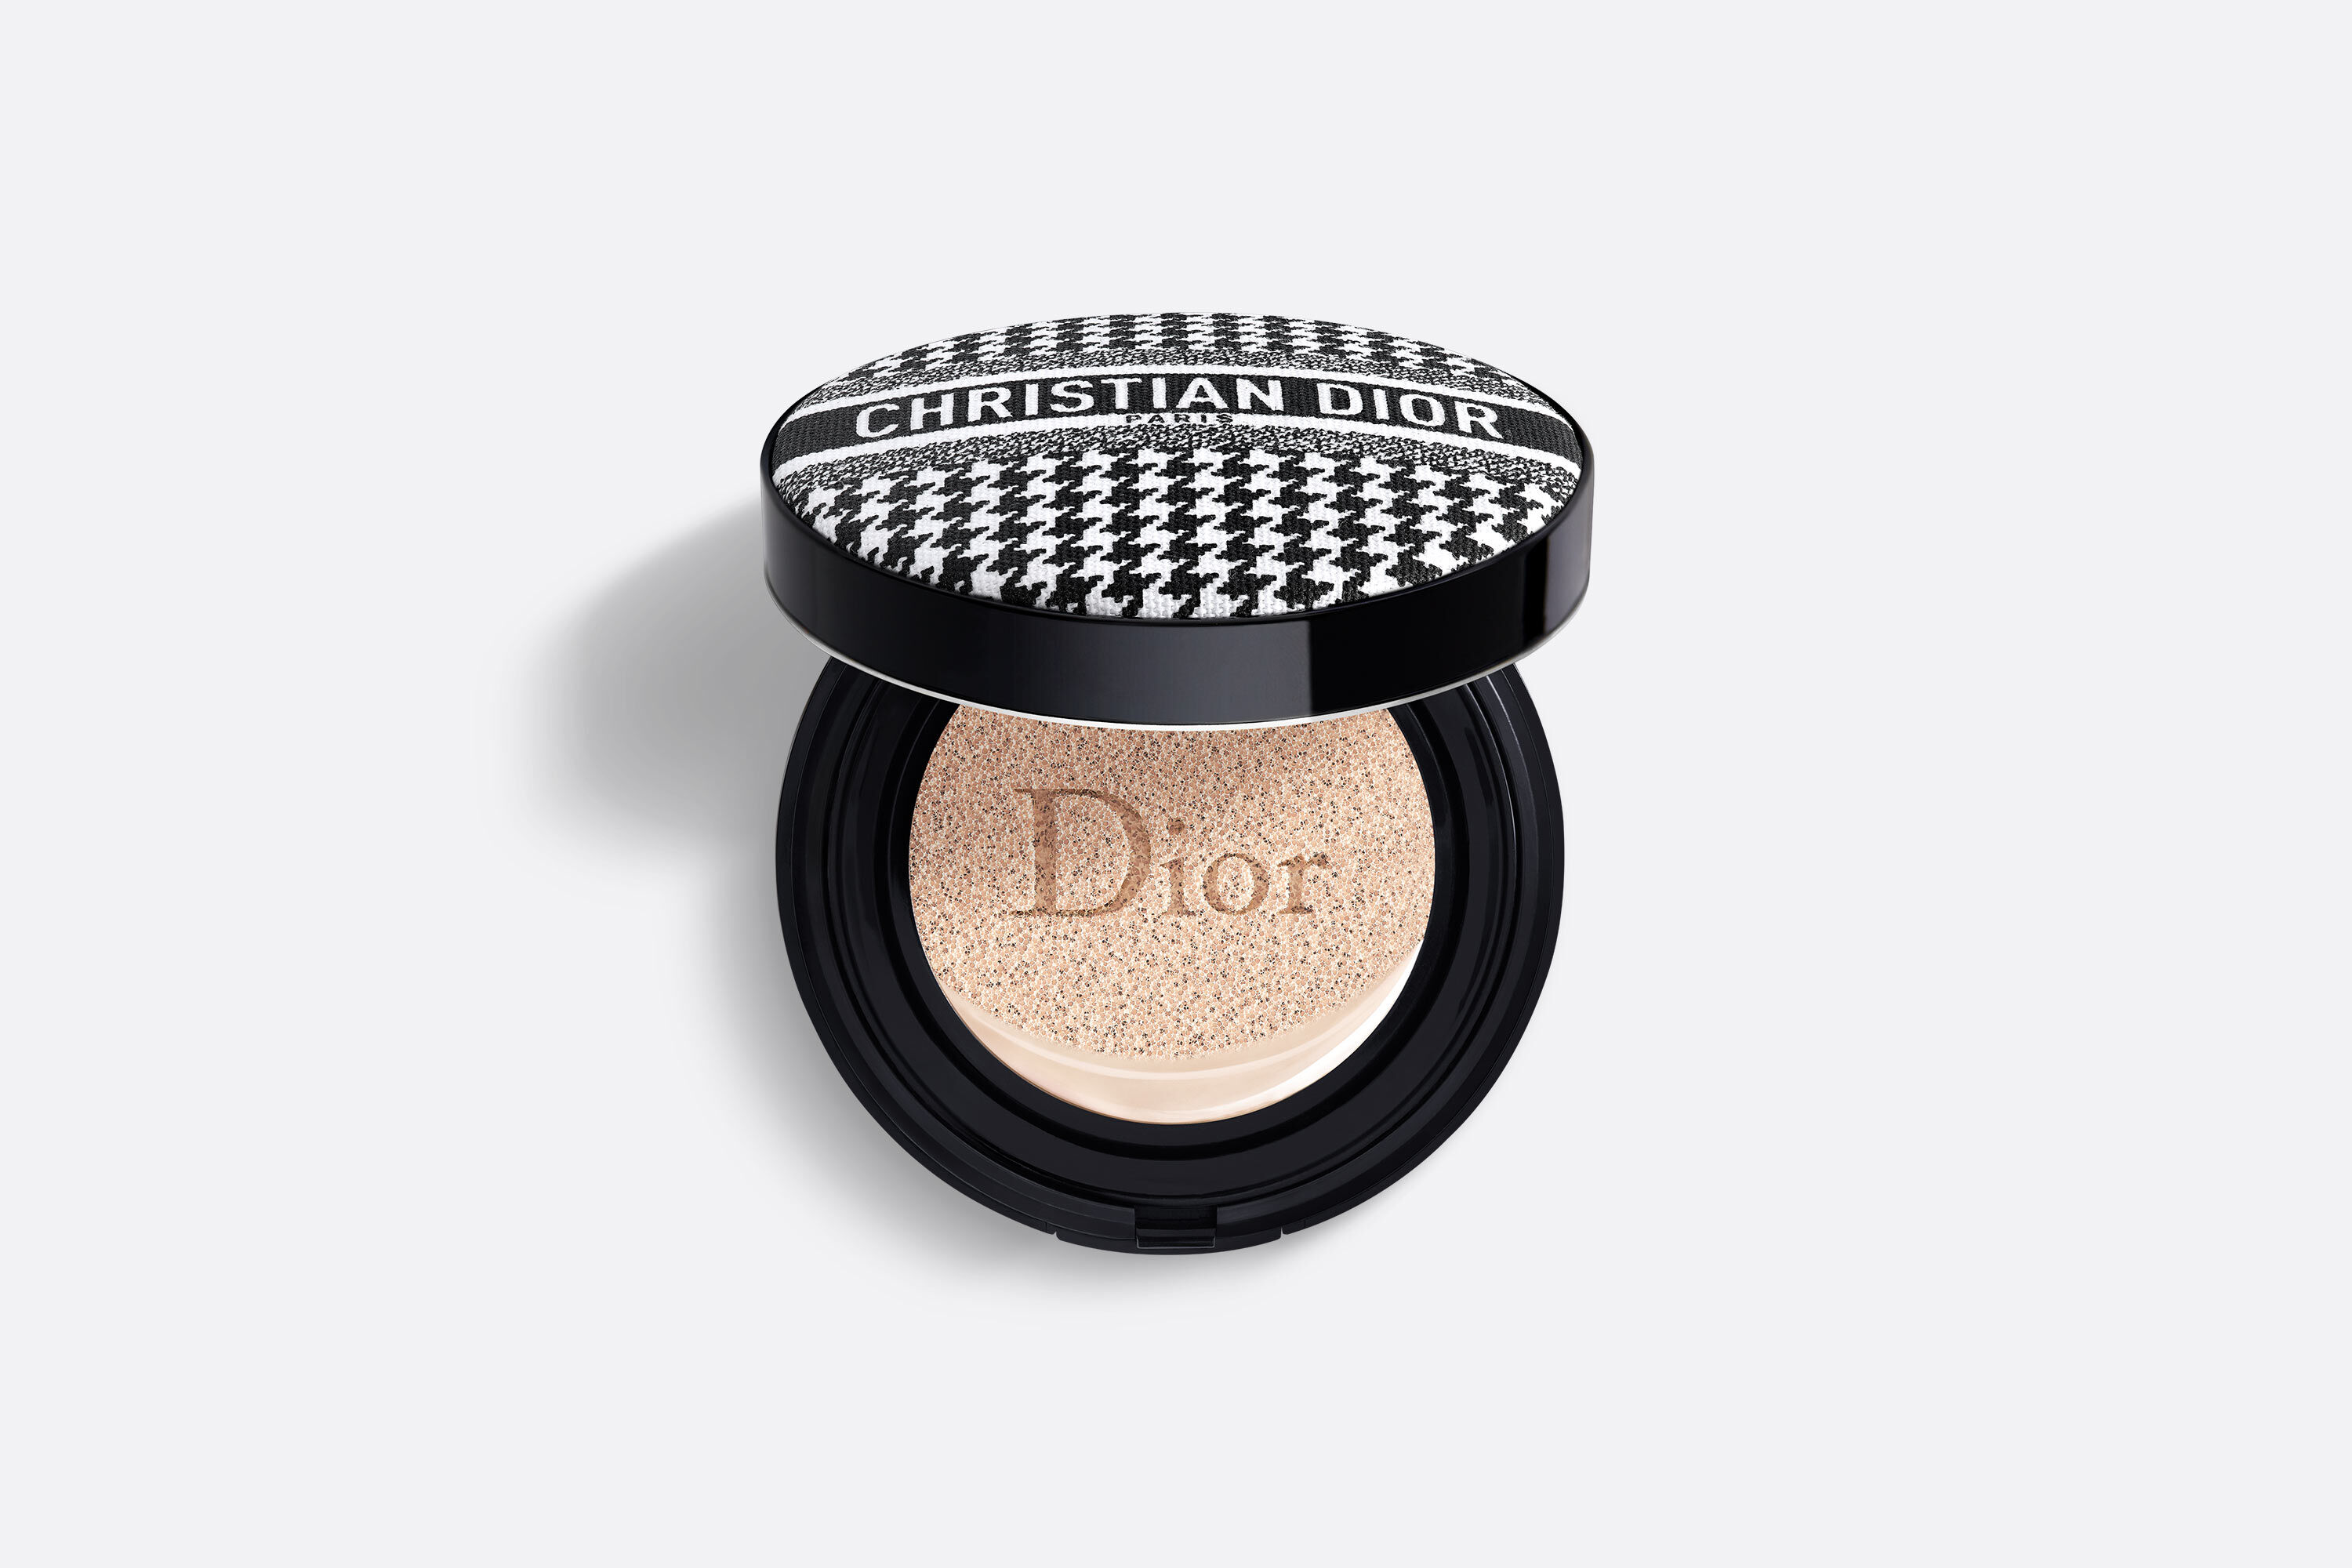 Dior Forever Couture Perfect Cushion - New Look Limited Edition